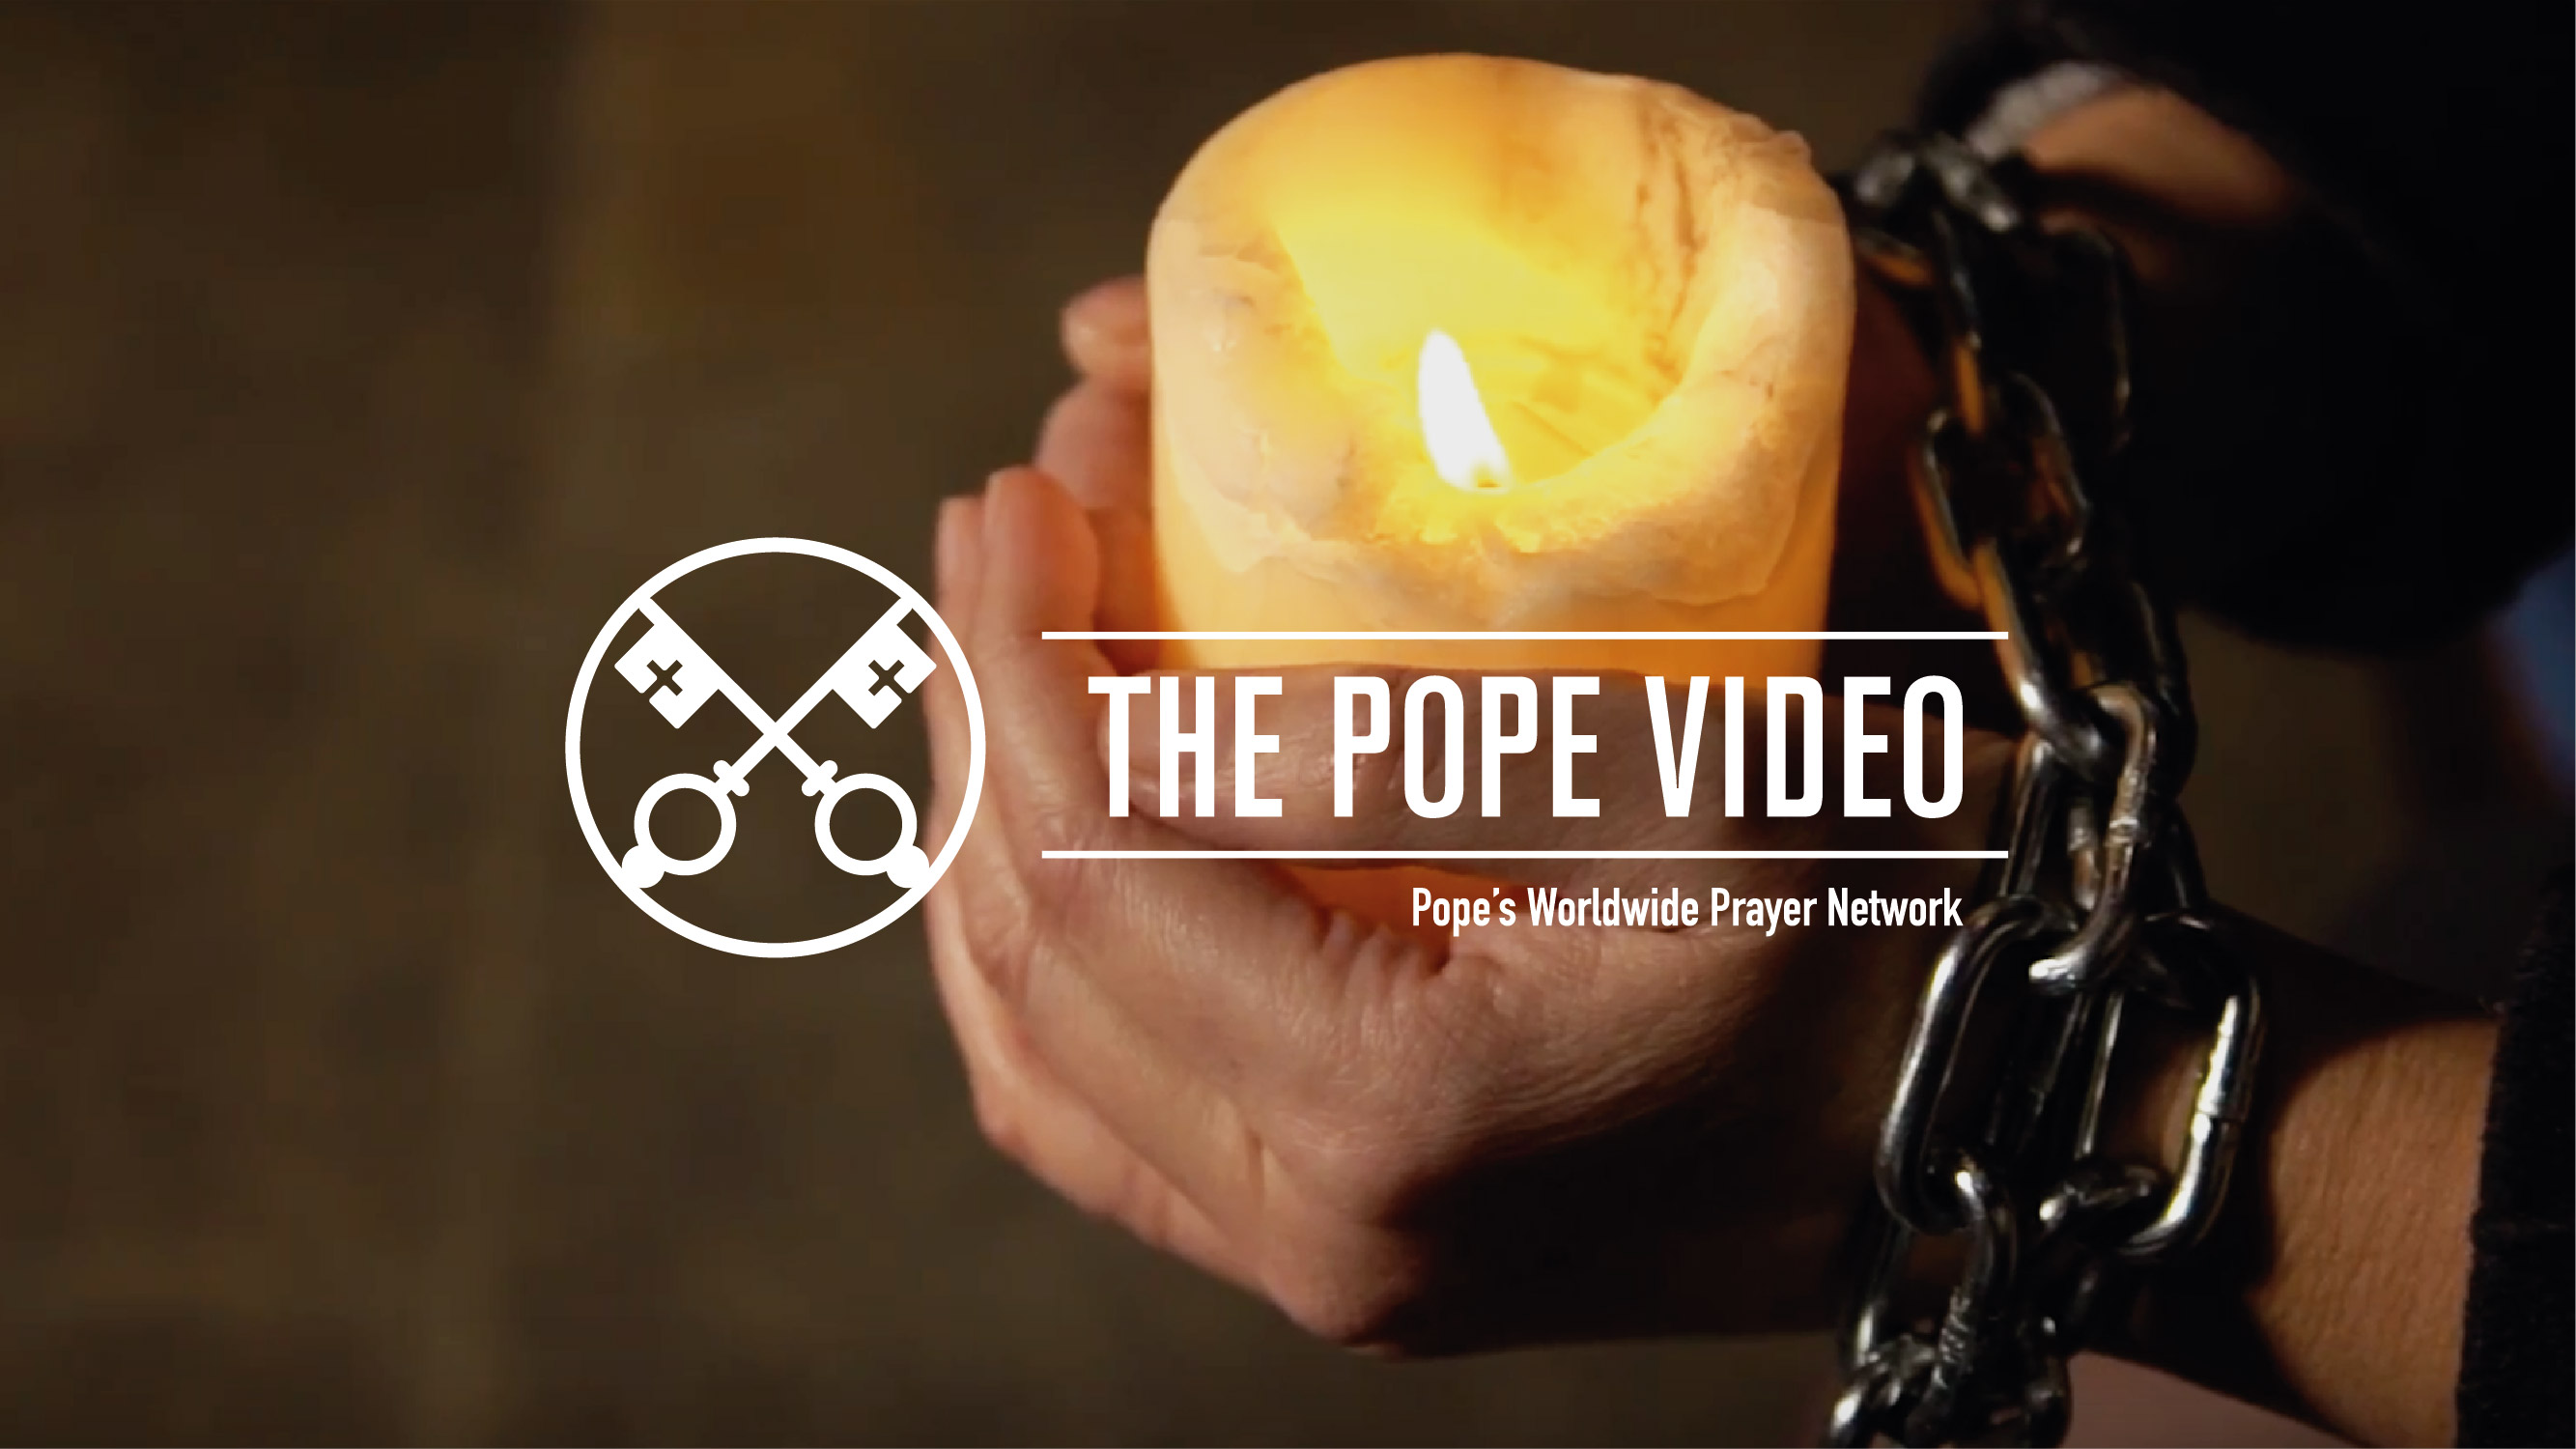 The Pope Video January 2018 (Official Image)